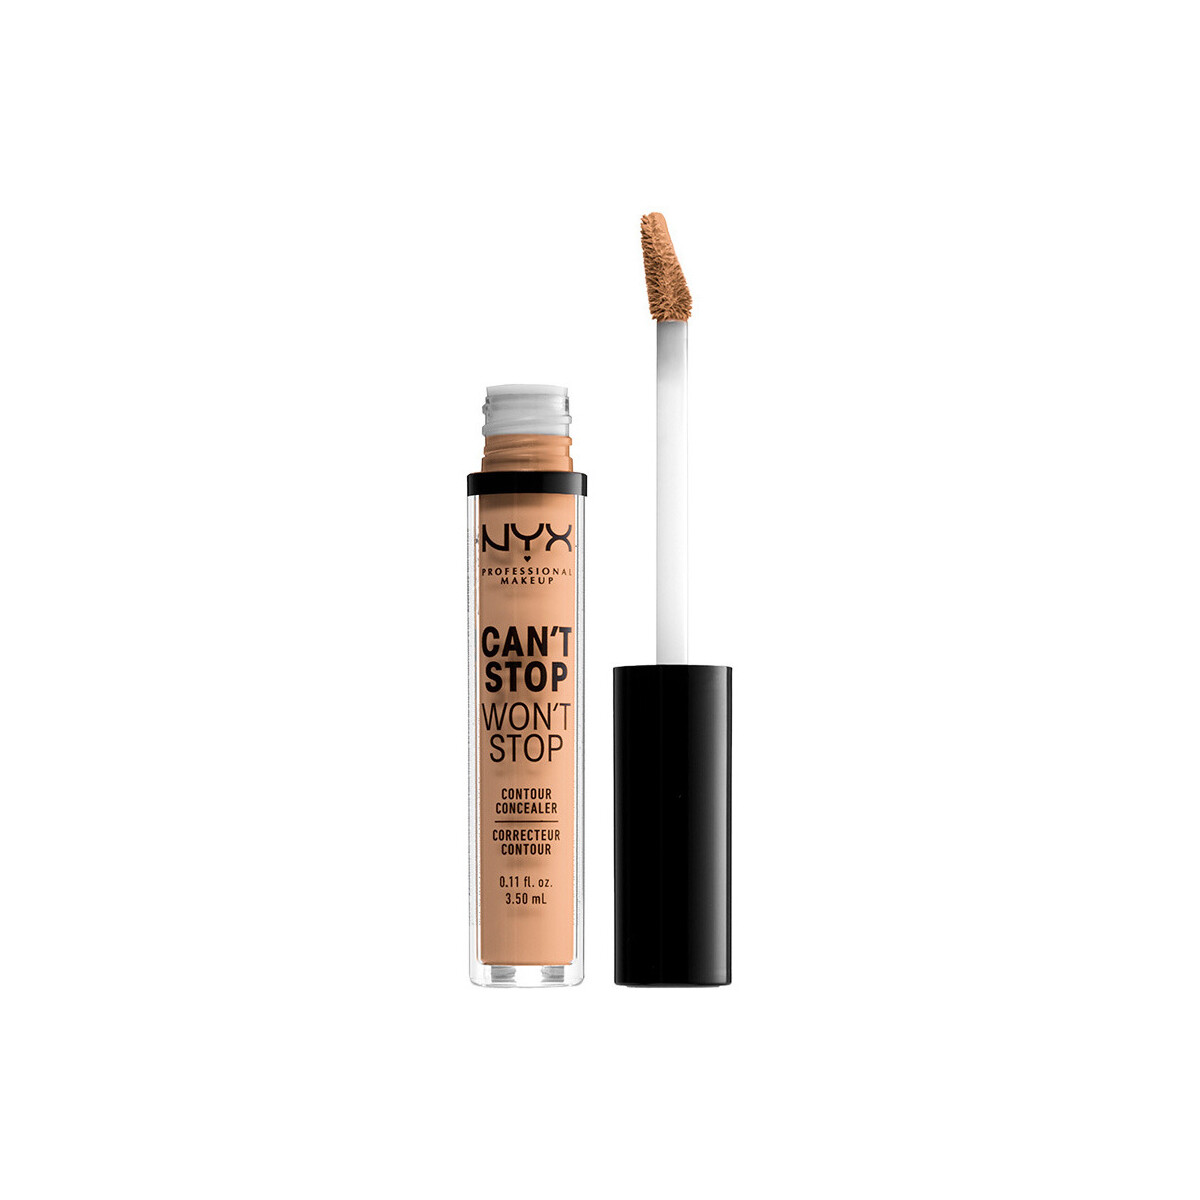 Beauty Make-up & Foundation  Nyx Professional Make Up Can't Stop Won't Stop Contour Concealer medium Olive 